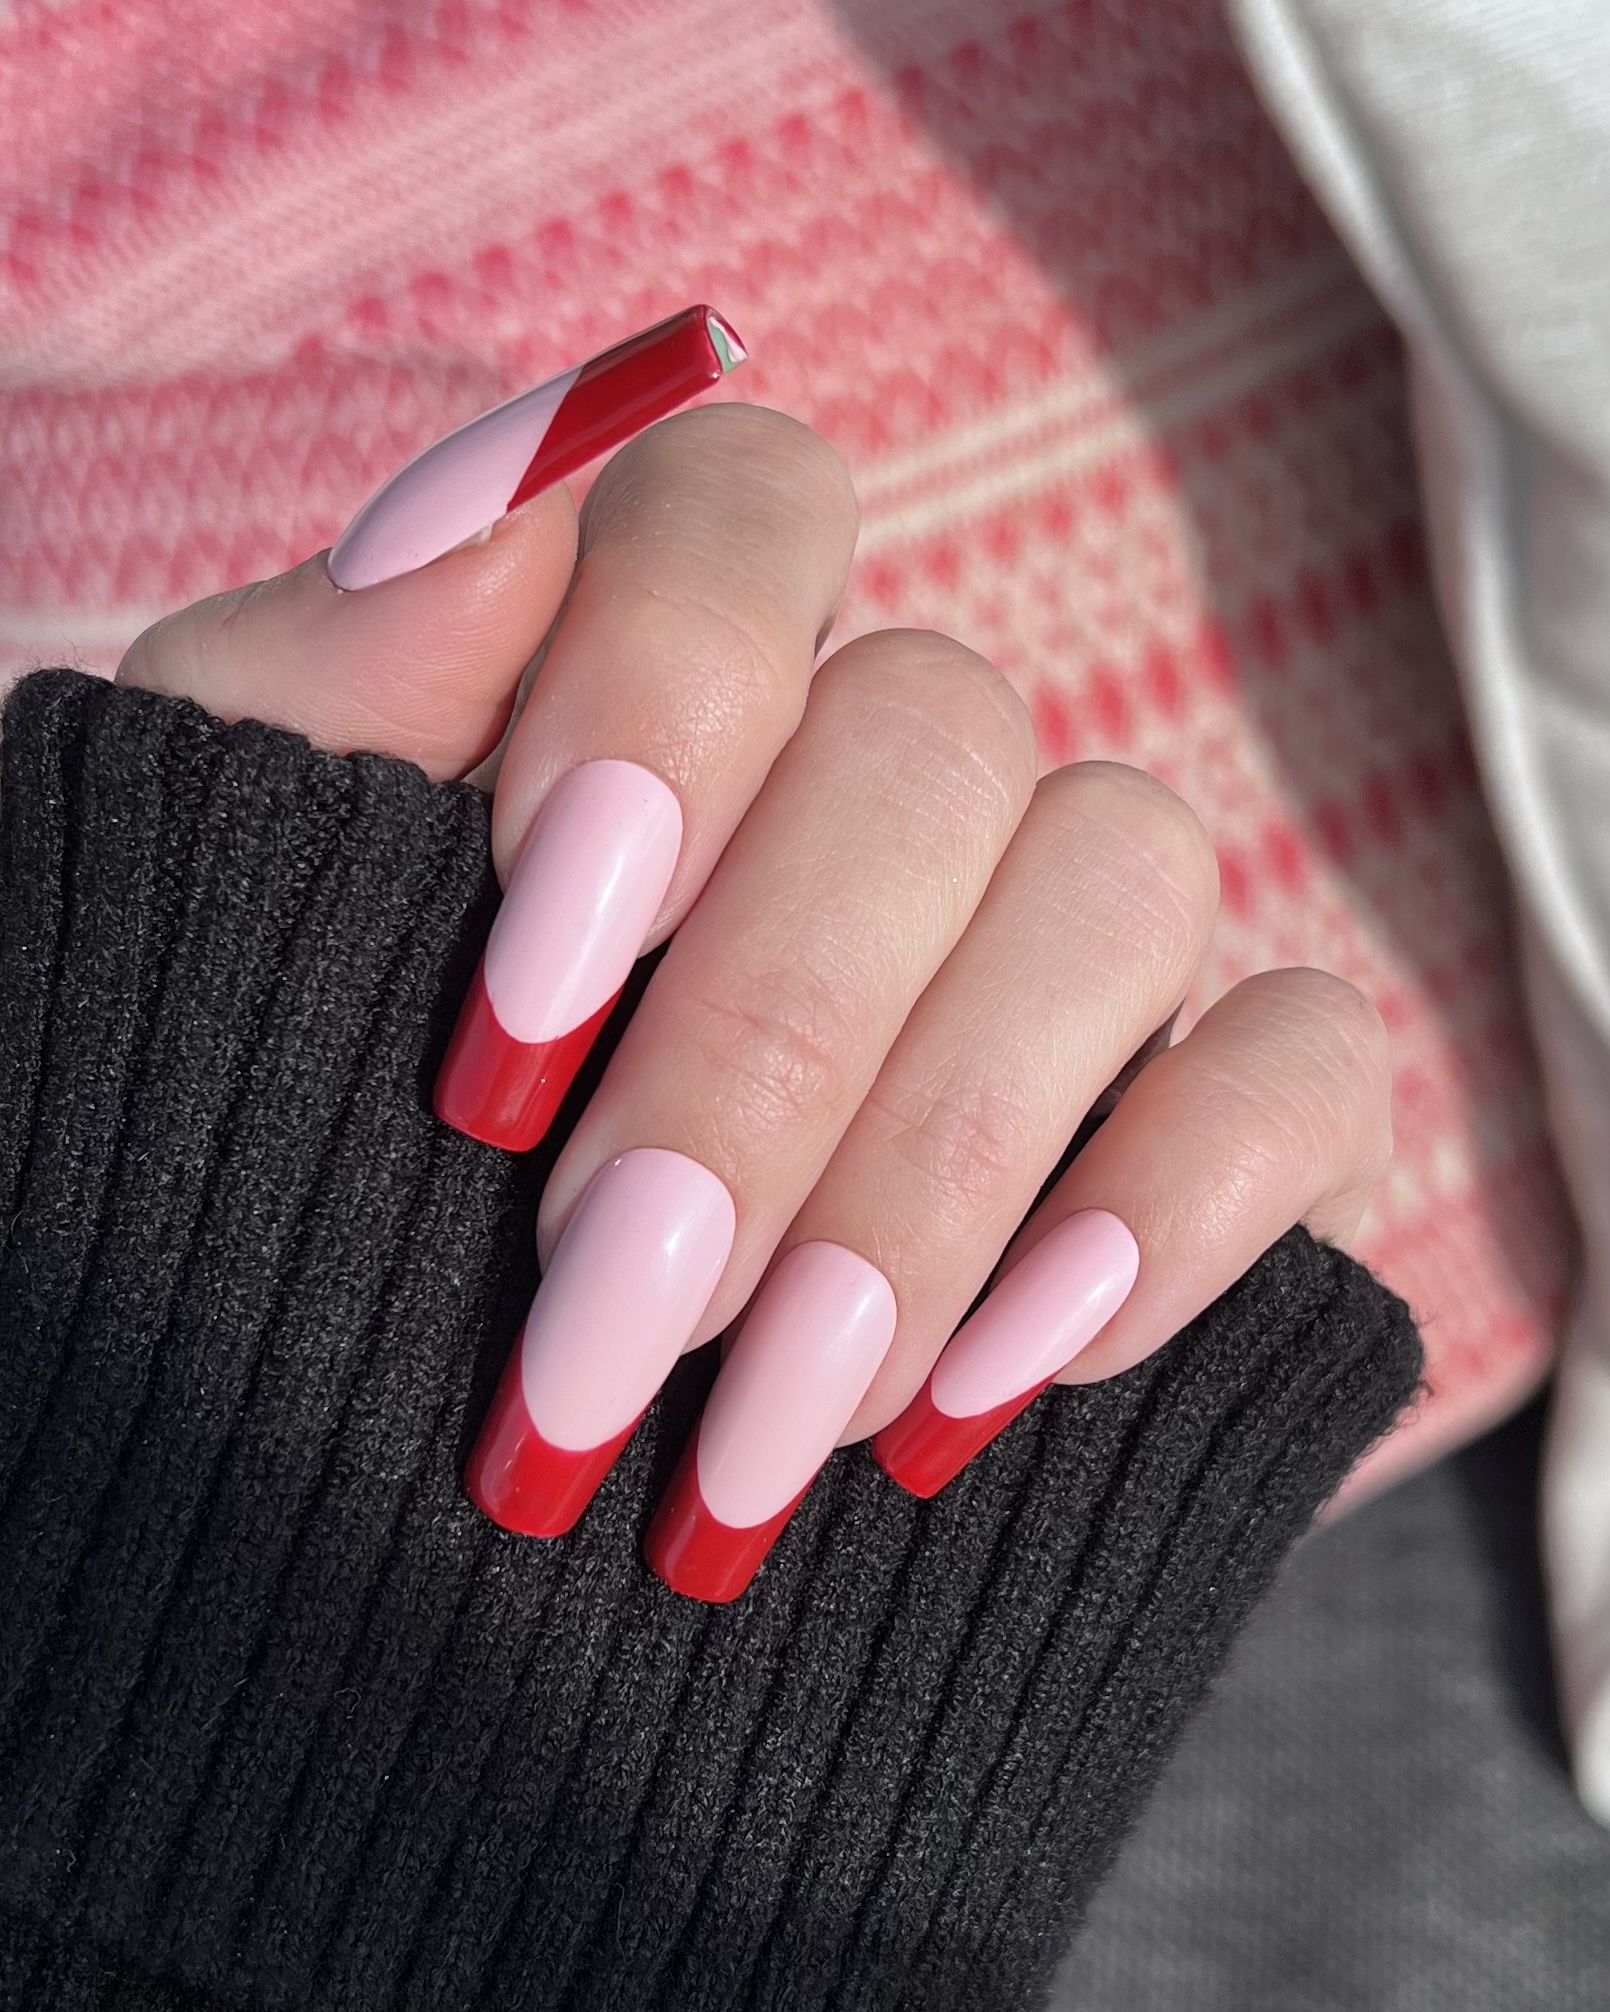 nails of the week: stiletto french with studs – Mr. Kate